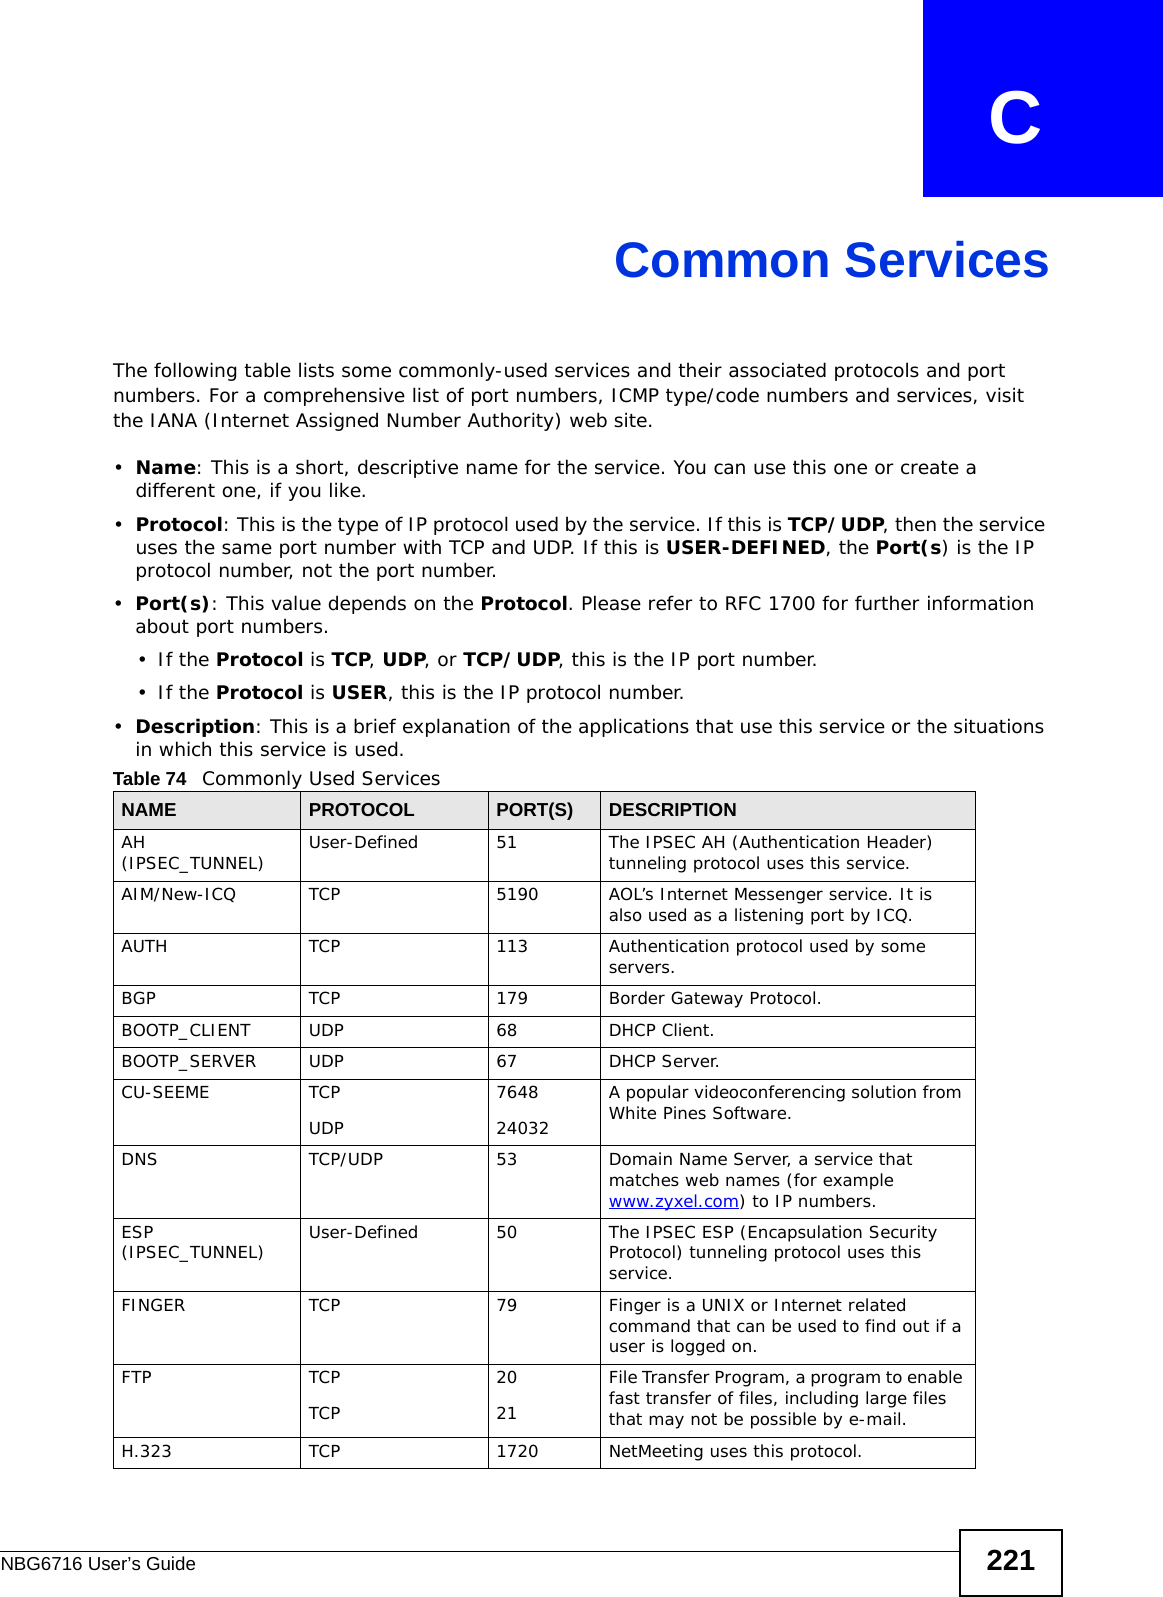 NBG6716 User’s Guide 221APPENDIX   CCommon ServicesThe following table lists some commonly-used services and their associated protocols and port numbers. For a comprehensive list of port numbers, ICMP type/code numbers and services, visit the IANA (Internet Assigned Number Authority) web site. •Name: This is a short, descriptive name for the service. You can use this one or create a different one, if you like.•Protocol: This is the type of IP protocol used by the service. If this is TCP/UDP, then the service uses the same port number with TCP and UDP. If this is USER-DEFINED, the Port(s) is the IP protocol number, not the port number.•Port(s): This value depends on the Protocol. Please refer to RFC 1700 for further information about port numbers.•If the Protocol is TCP, UDP, or TCP/UDP, this is the IP port number.•If the Protocol is USER, this is the IP protocol number.•Description: This is a brief explanation of the applications that use this service or the situations in which this service is used.Table 74   Commonly Used ServicesNAME PROTOCOL PORT(S) DESCRIPTIONAH (IPSEC_TUNNEL) User-Defined 51 The IPSEC AH (Authentication Header) tunneling protocol uses this service.AIM/New-ICQ TCP 5190 AOL’s Internet Messenger service. It is also used as a listening port by ICQ.AUTH TCP 113 Authentication protocol used by some servers.BGP TCP 179 Border Gateway Protocol.BOOTP_CLIENT UDP 68 DHCP Client.BOOTP_SERVER UDP 67 DHCP Server.CU-SEEME TCPUDP764824032A popular videoconferencing solution from White Pines Software.DNS TCP/UDP 53 Domain Name Server, a service that matches web names (for example www.zyxel.com) to IP numbers.ESP (IPSEC_TUNNEL) User-Defined 50 The IPSEC ESP (Encapsulation Security Protocol) tunneling protocol uses this service.FINGER TCP 79 Finger is a UNIX or Internet related command that can be used to find out if a user is logged on.FTP TCPTCP2021File Transfer Program, a program to enable fast transfer of files, including large files that may not be possible by e-mail.H.323 TCP 1720 NetMeeting uses this protocol.